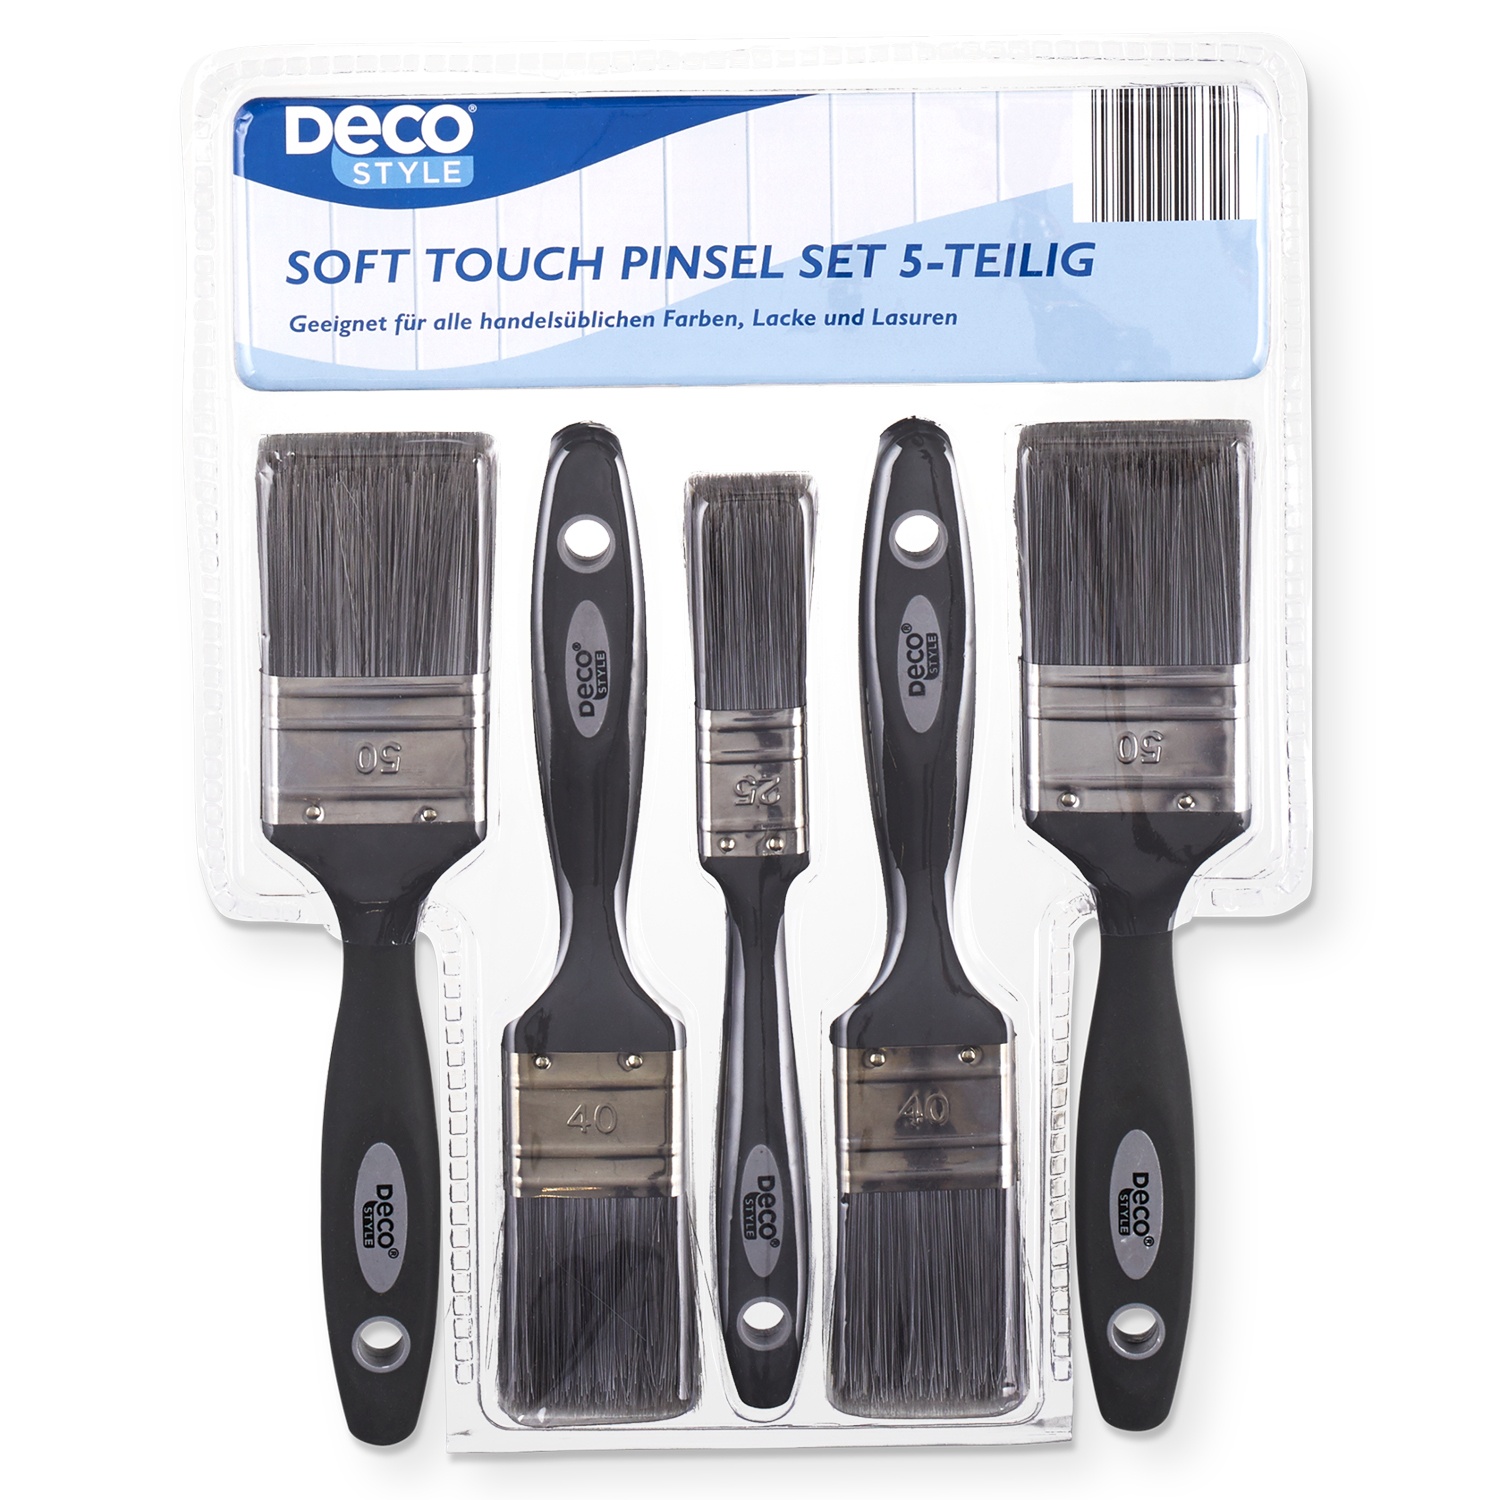 DECO STYLE® Soft Touch Pinsel-Set